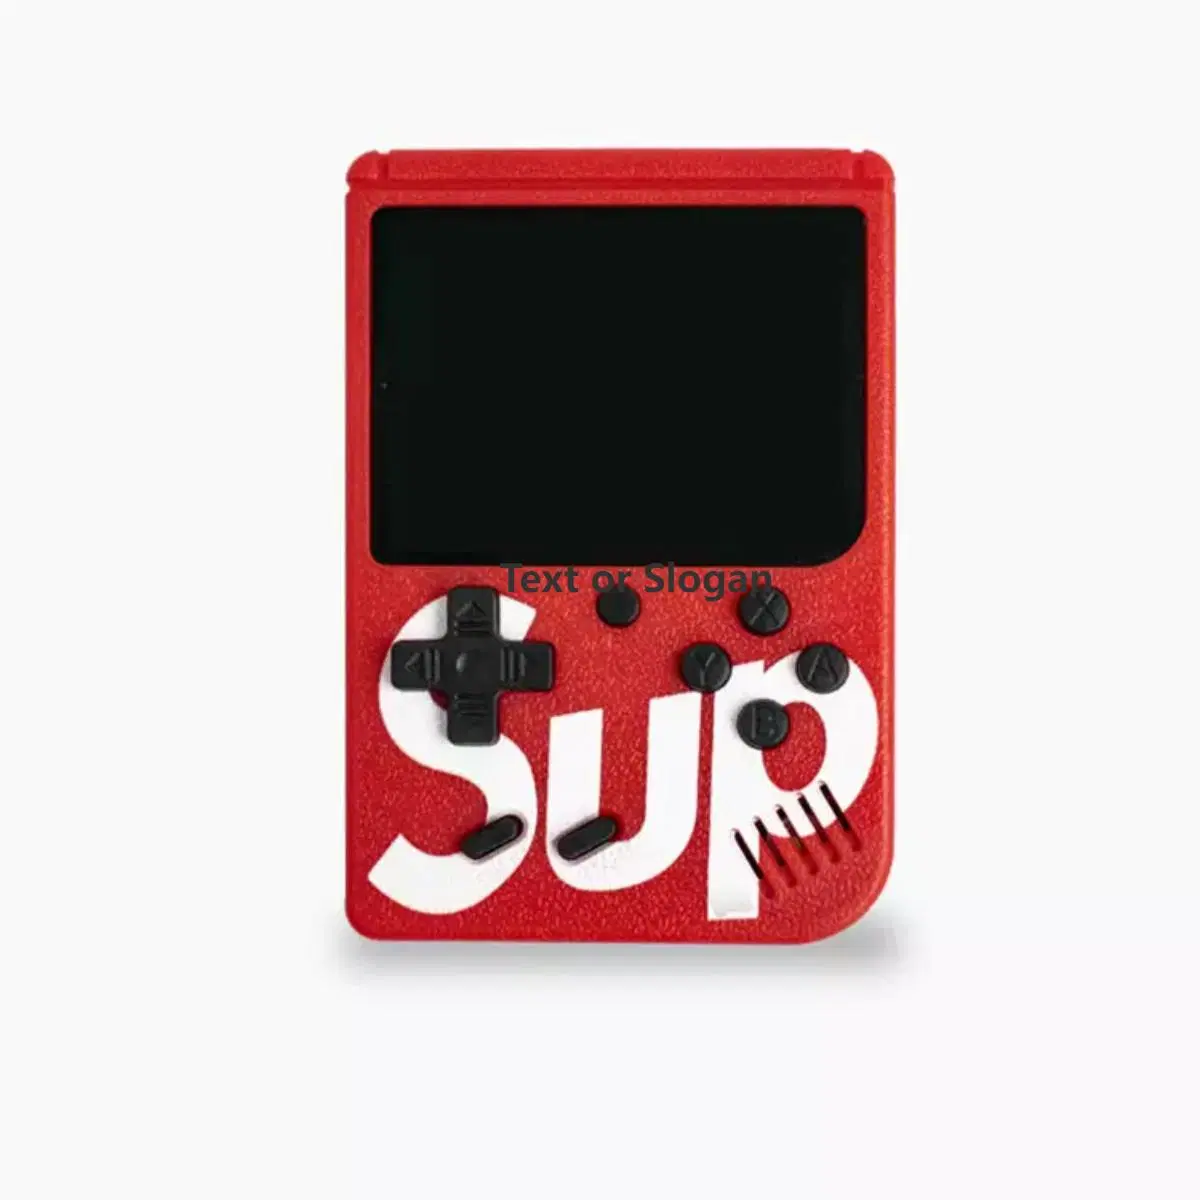 Sup Portable Video Handheld Game Single Player Game Console